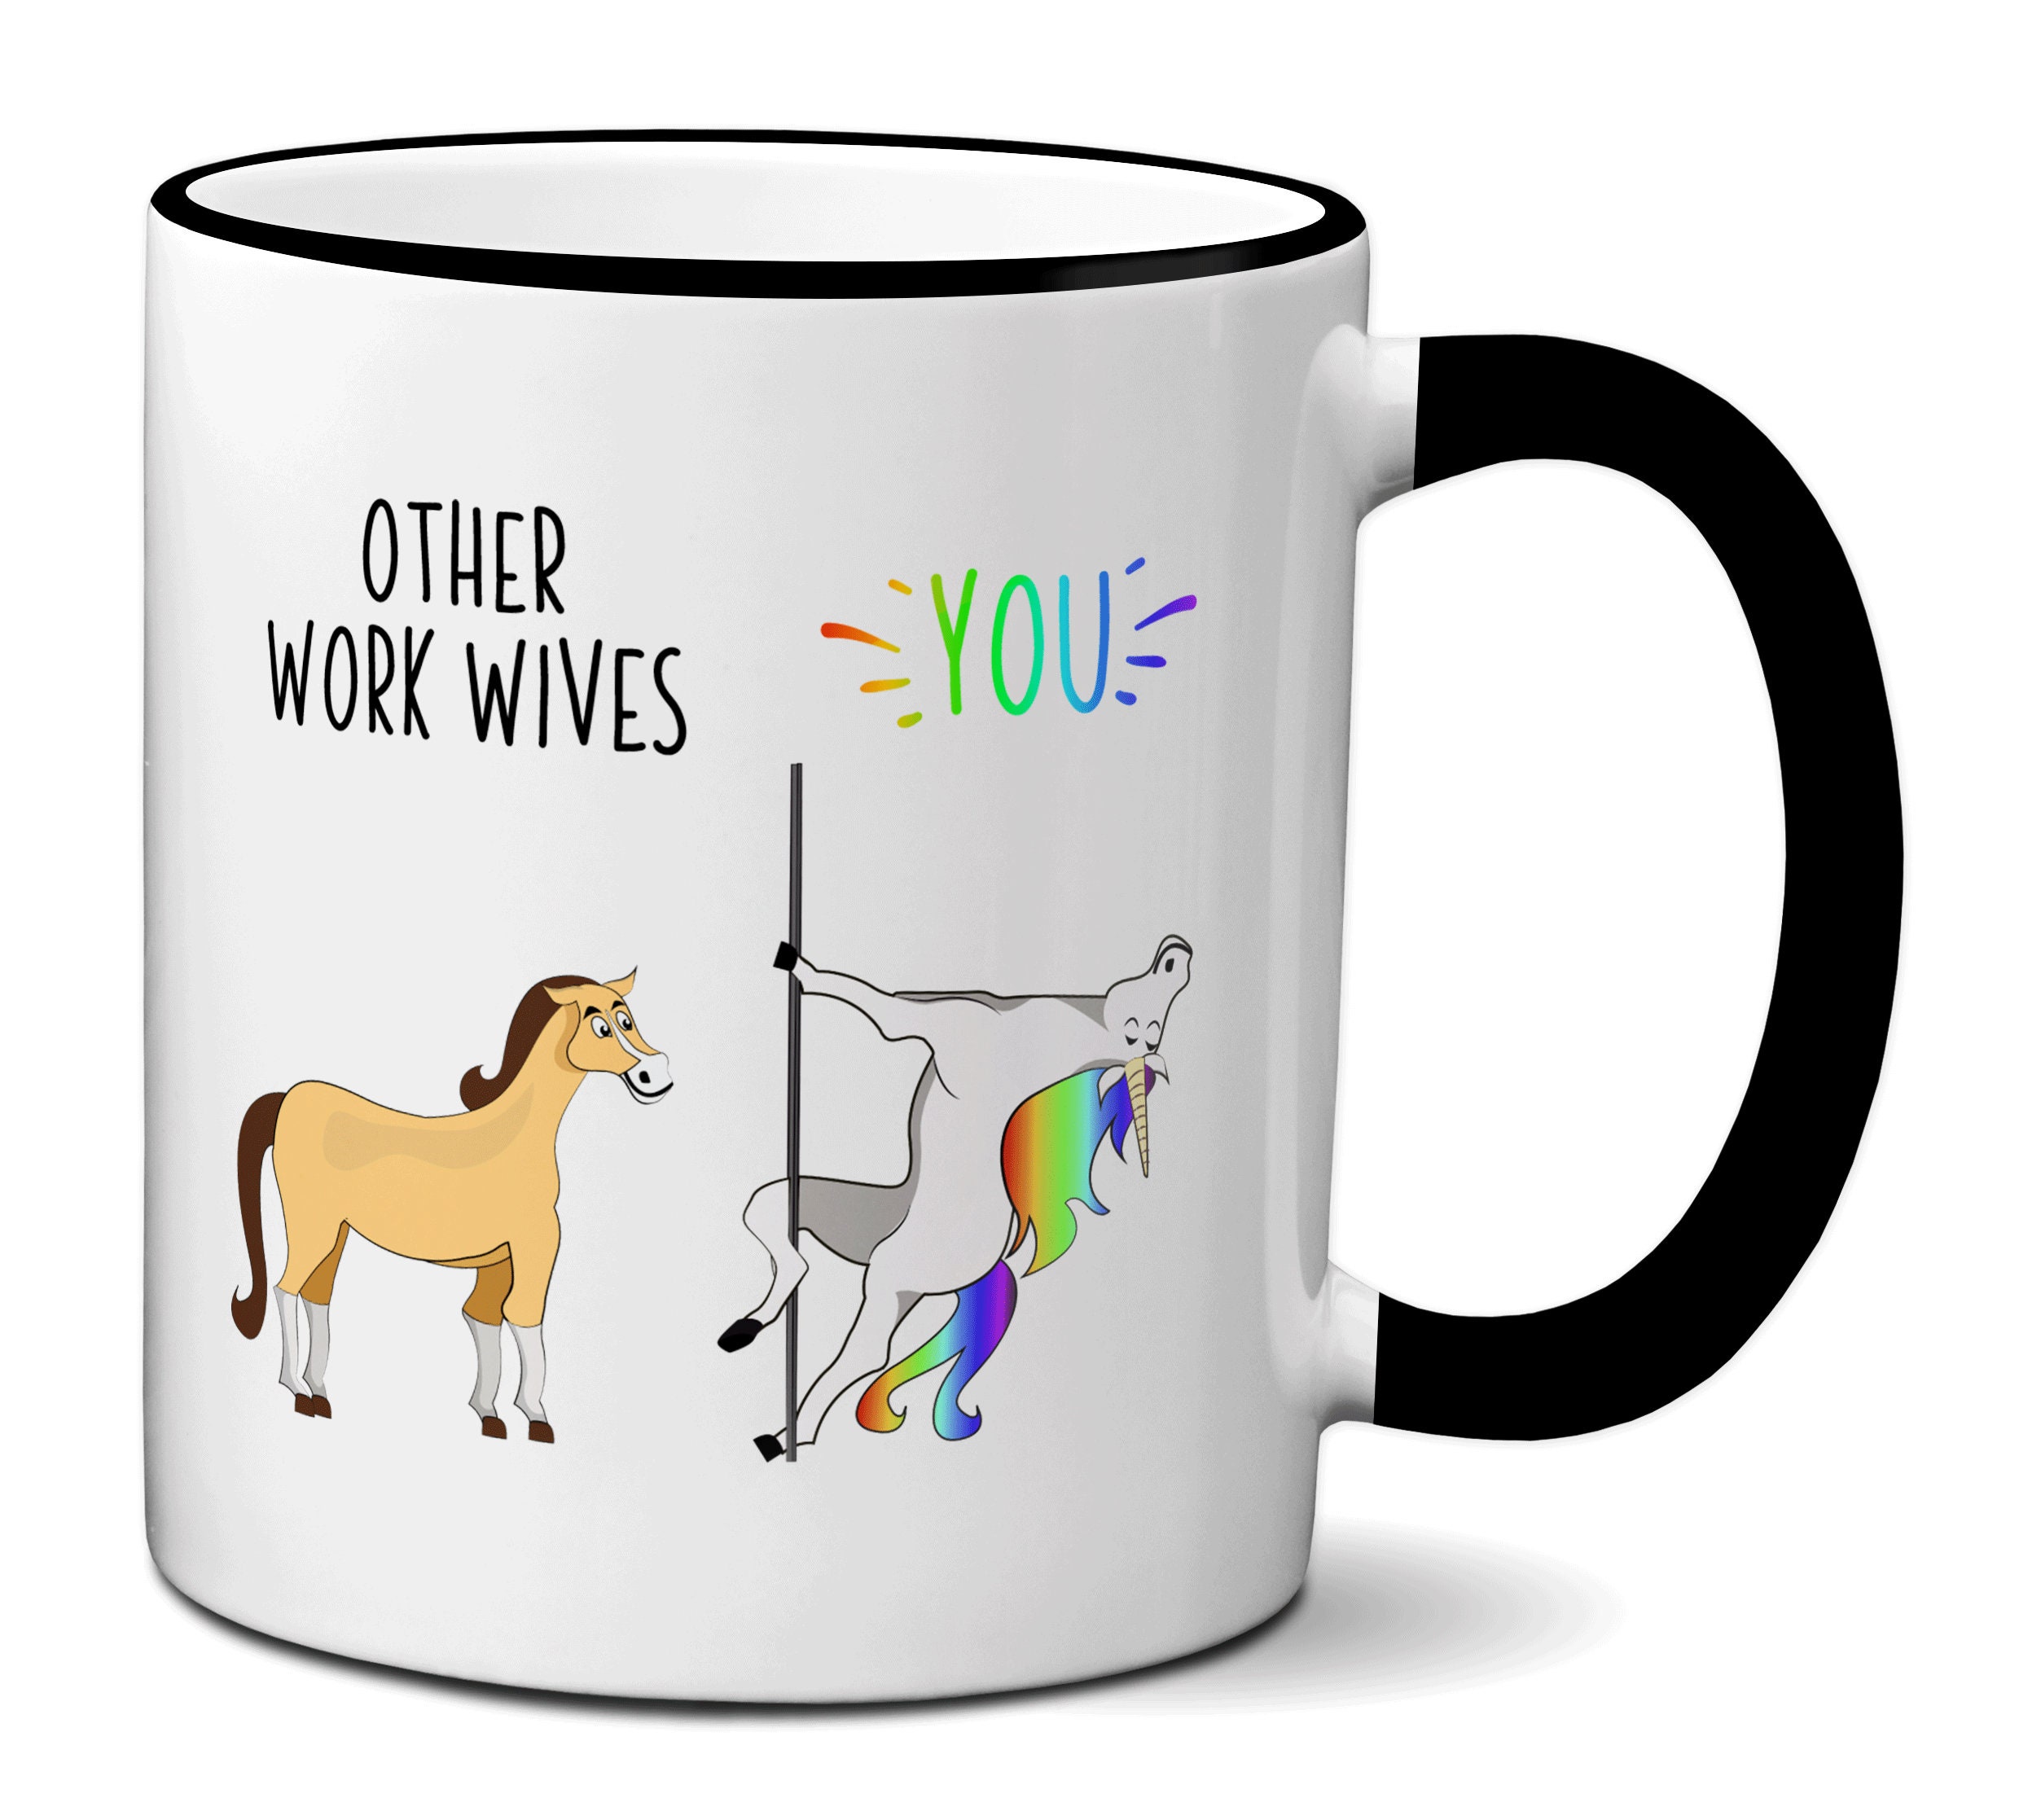 Funny Work Wife Gifts Other Work Wives You Unicorn Mug Work pic pic